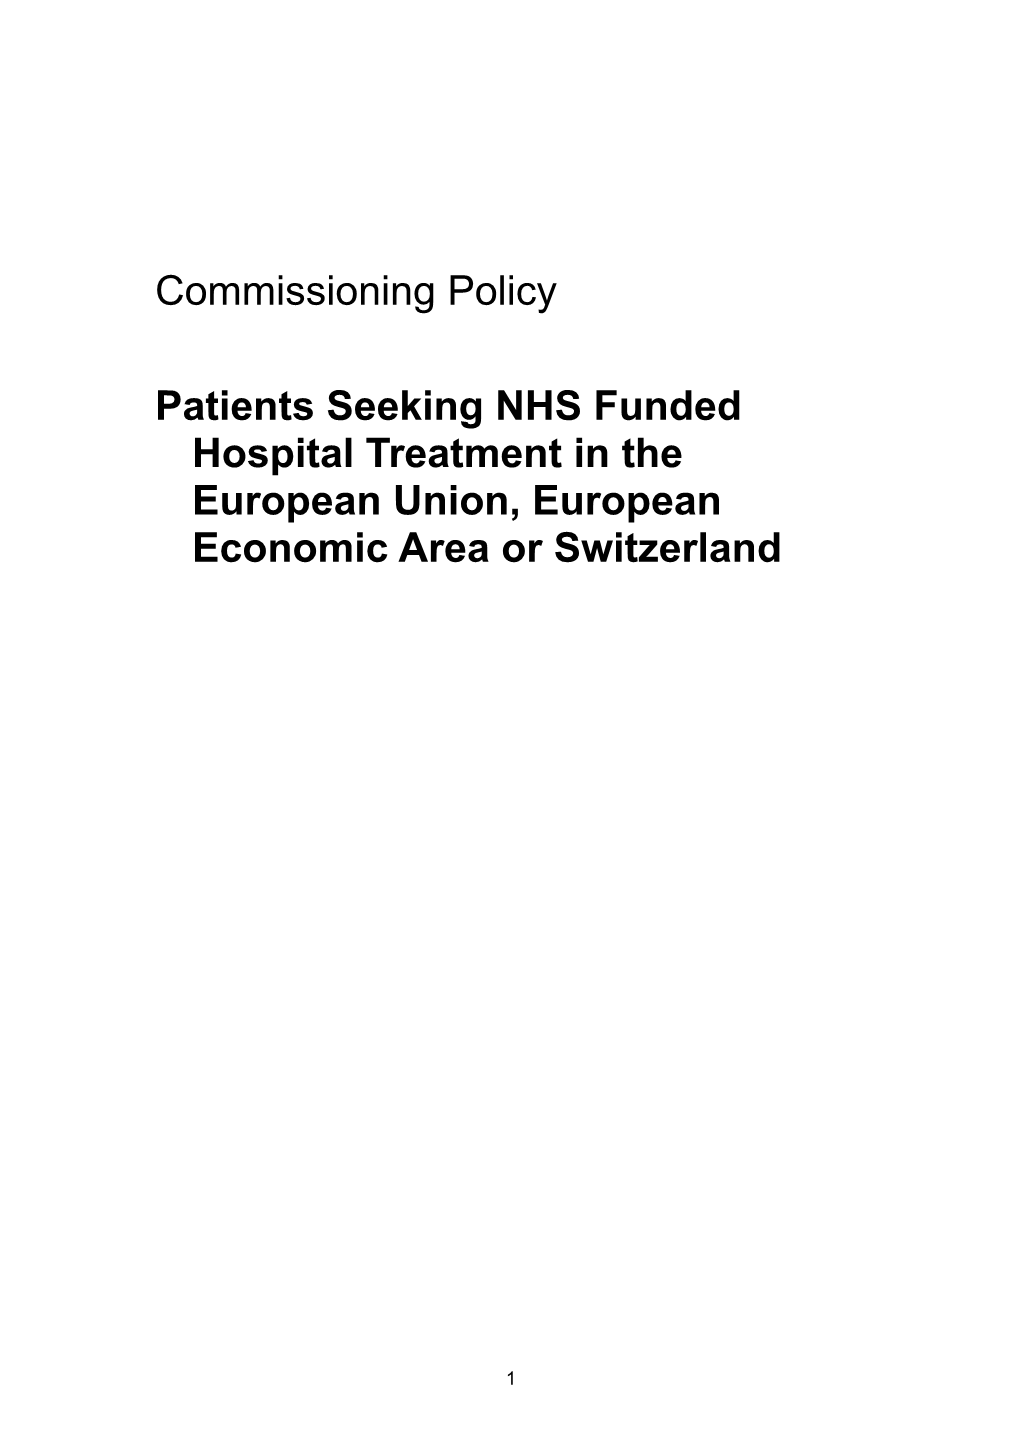 Patients Seeking NHS Funded Hospital Treatment in the European Union, European Economic